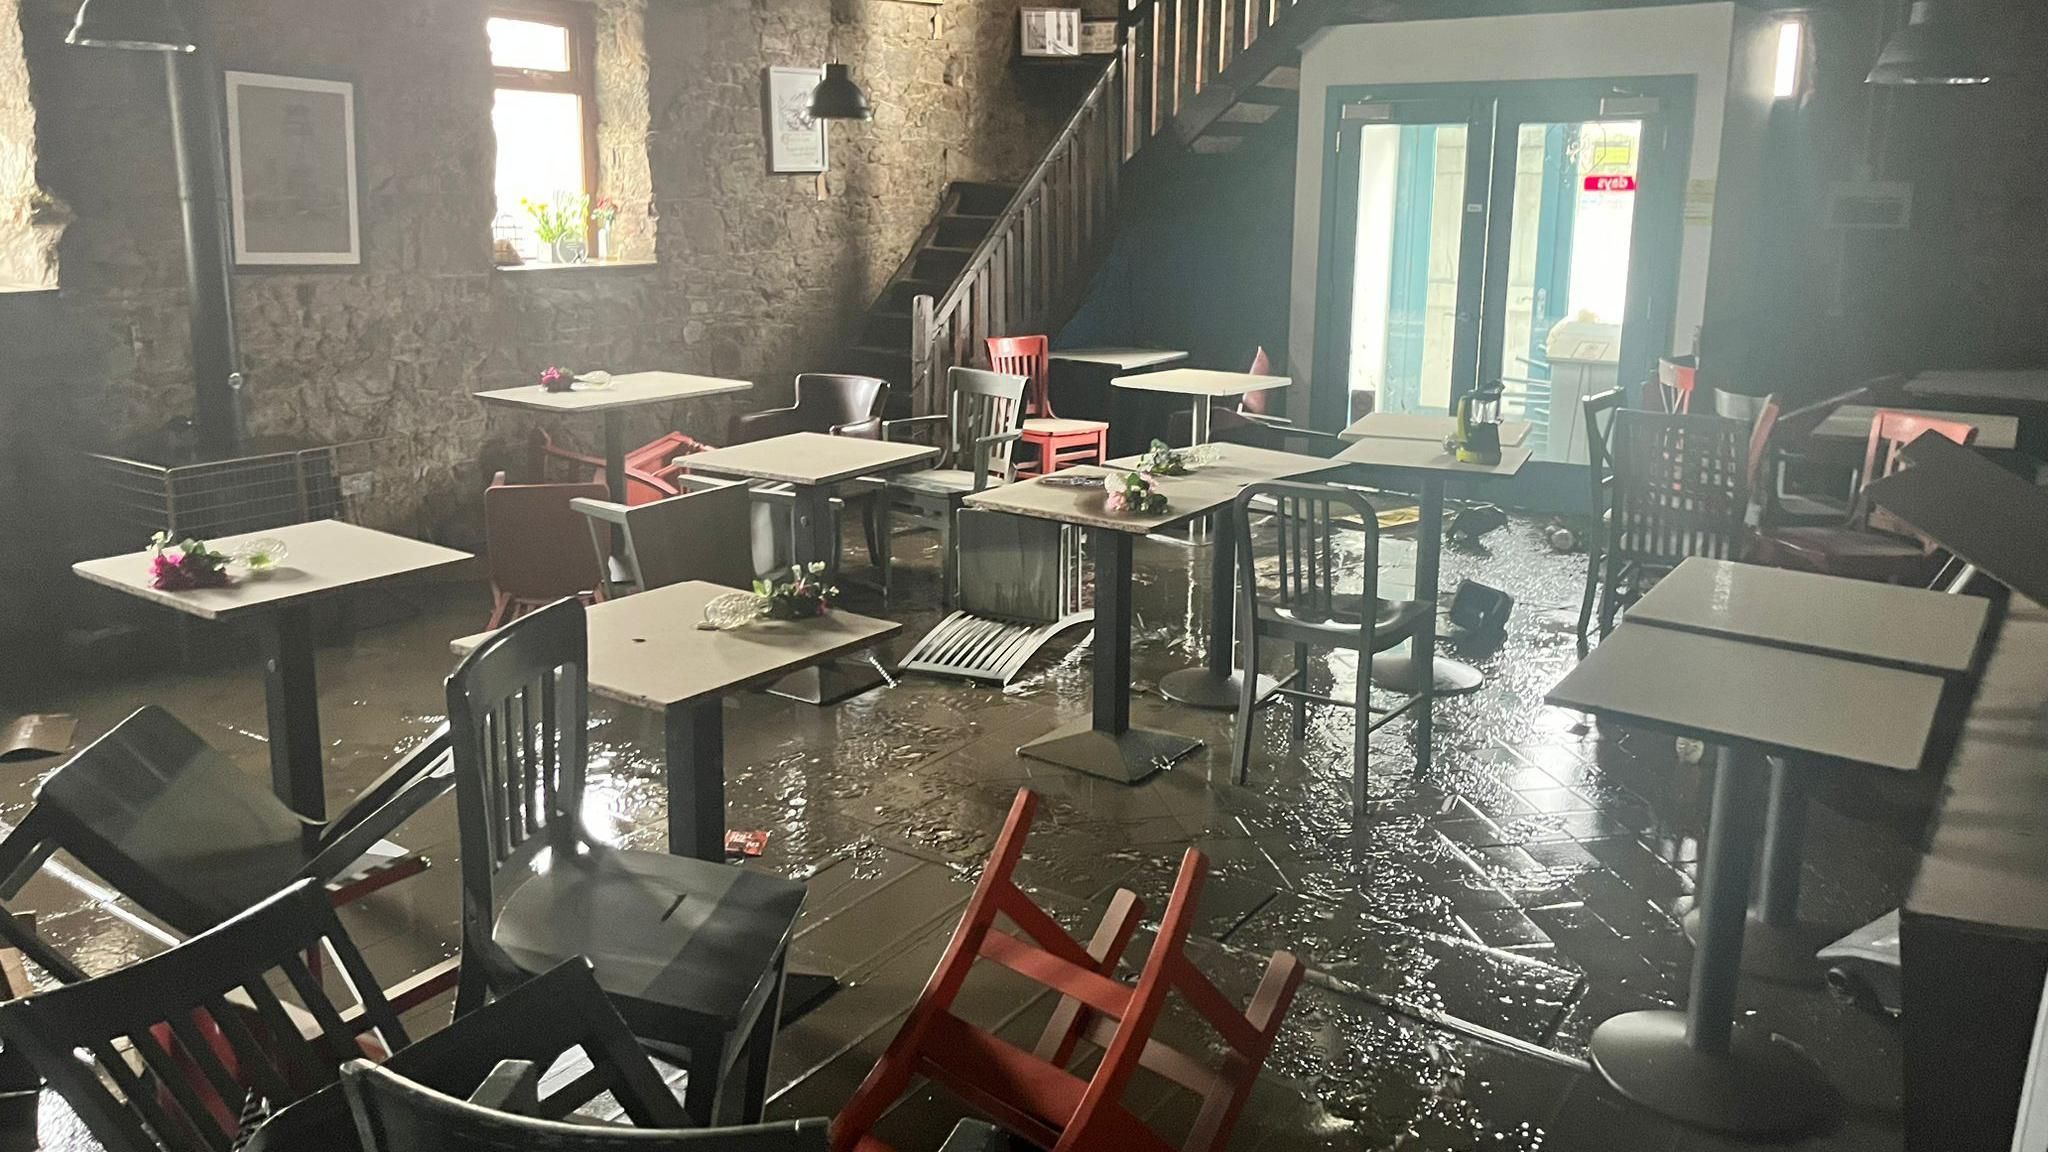 Floodwater and overturned furniture in Synge & Byrne's Newry cafe